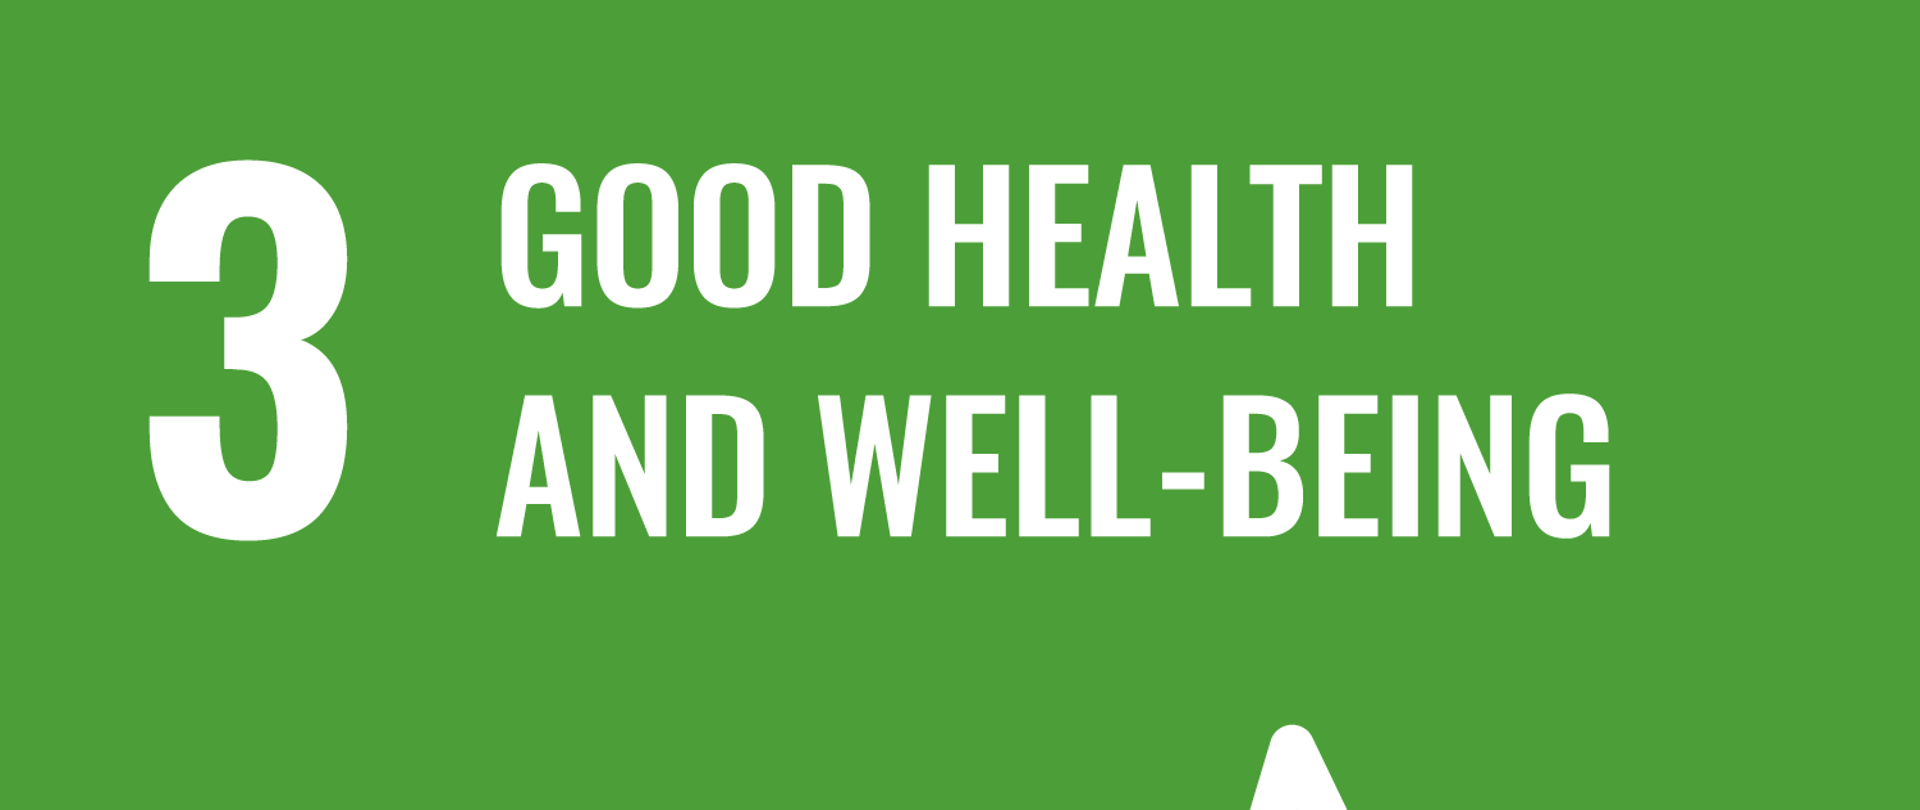 3 Good health and well-being